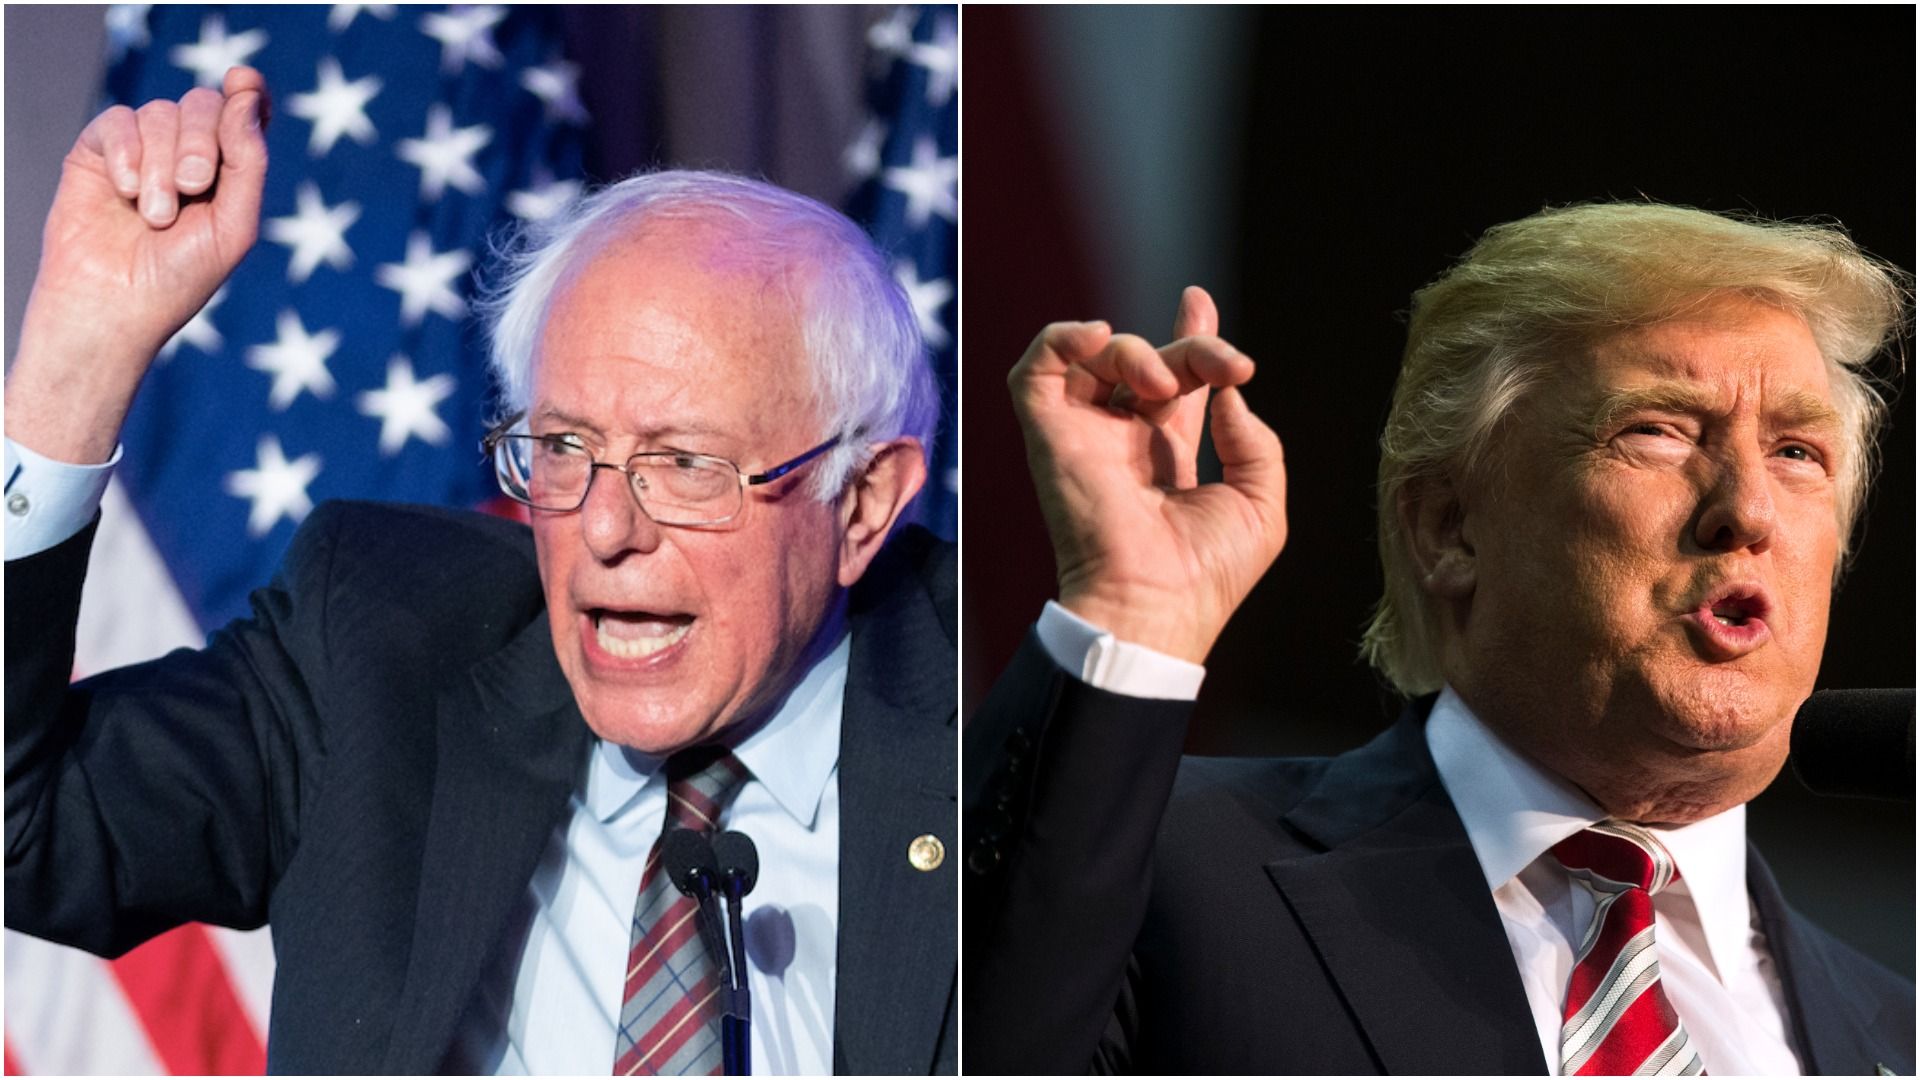 A split photo featuring Sanders and Trump at rallies